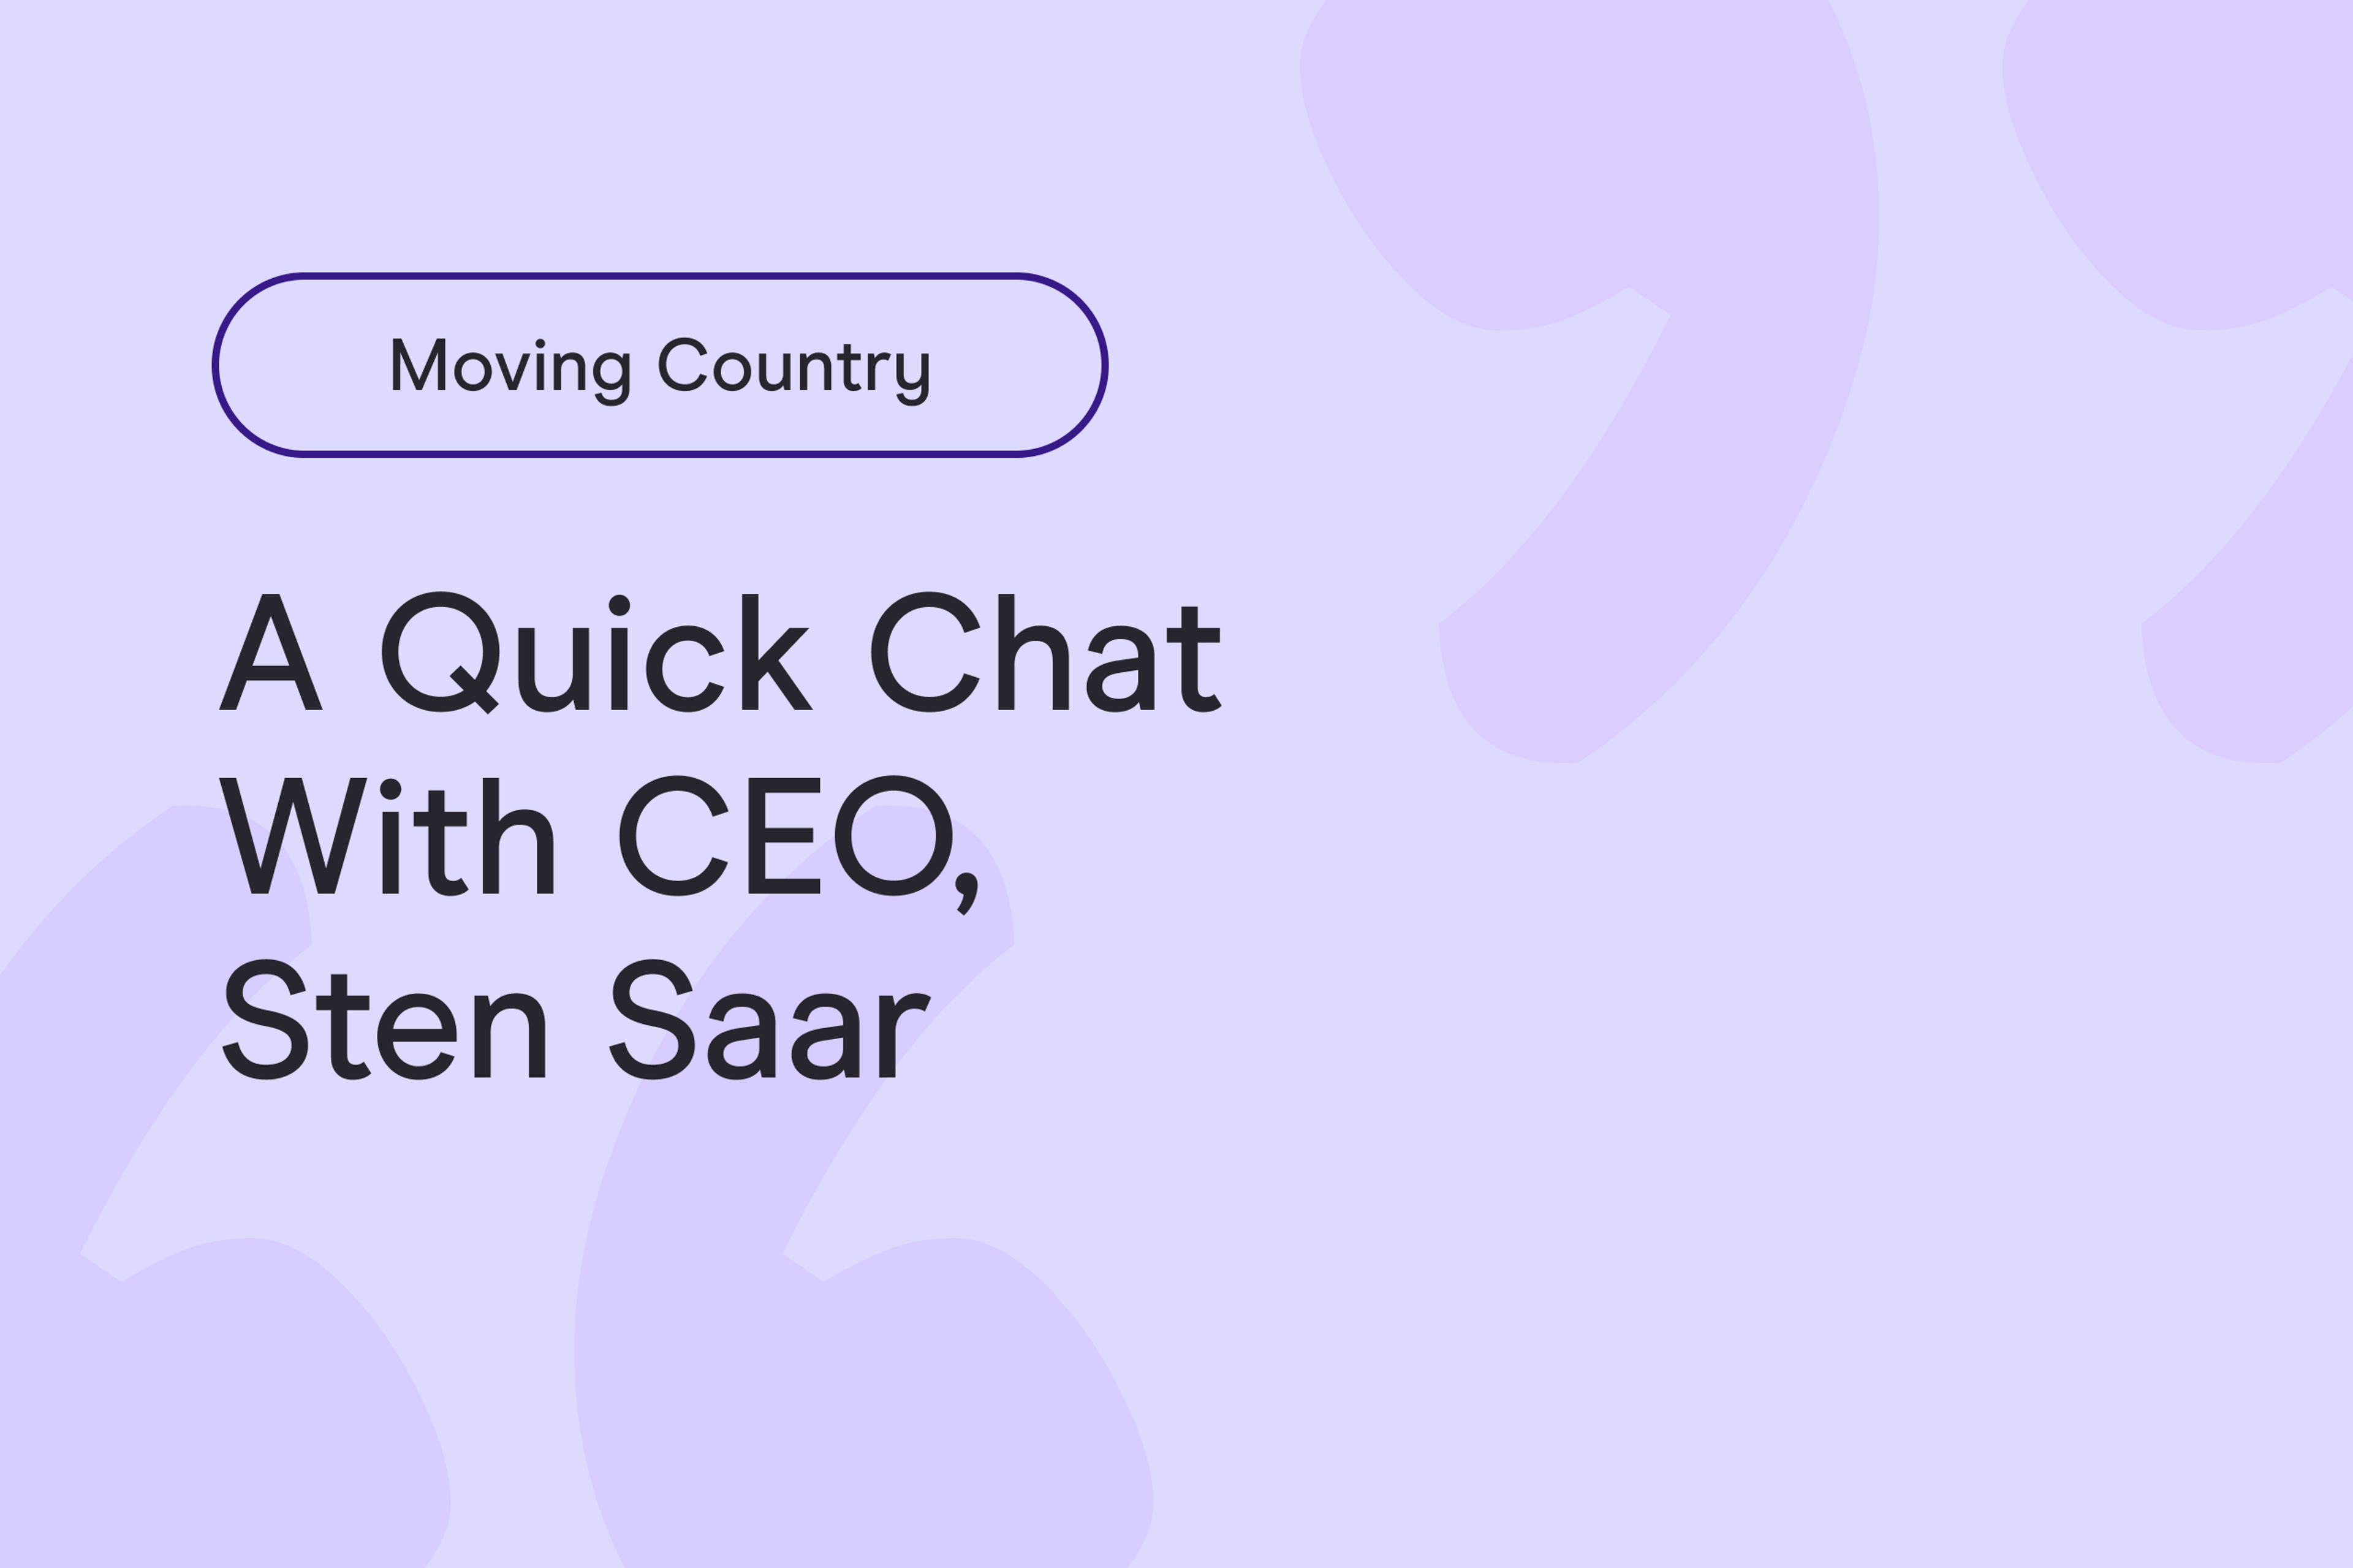 Moving Country: a quick Q&A with our CEO, Sten Saar